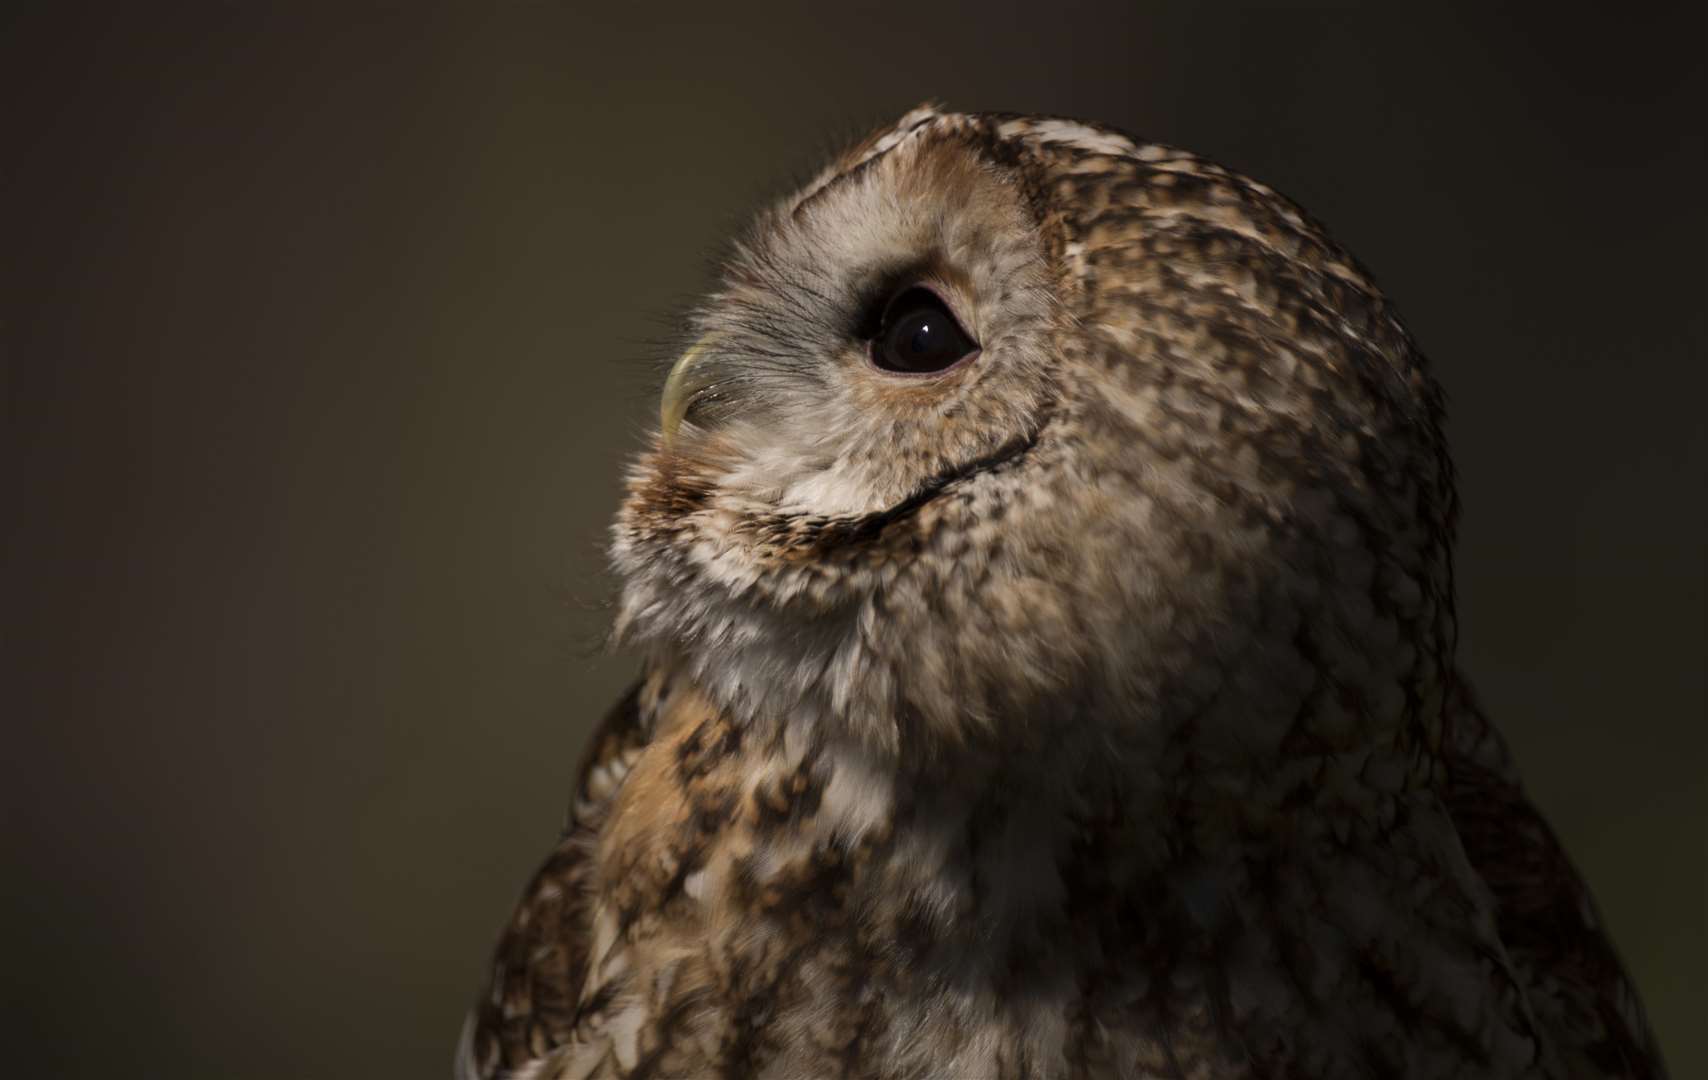 Get to meet and photograph owls at Betteshanger Country Park Picture: Richard Taylor-Jones